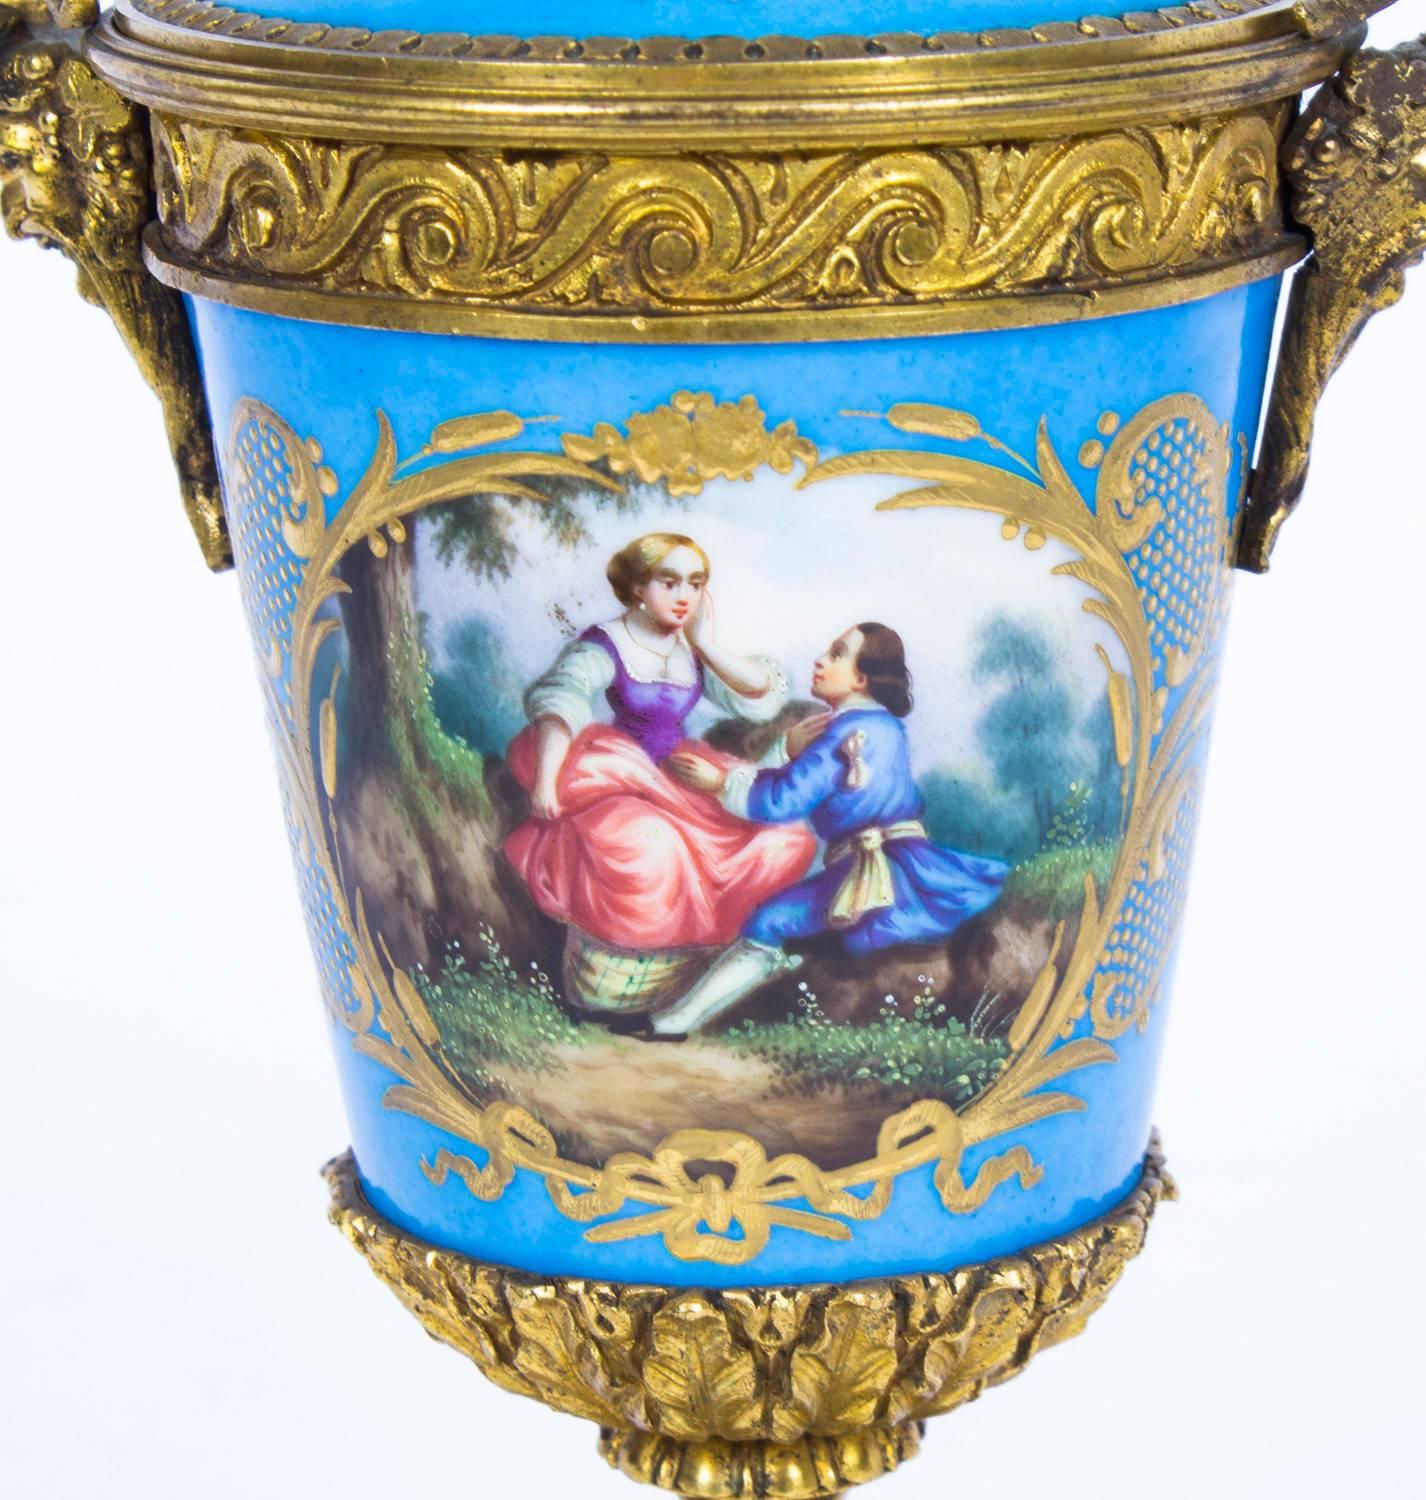 Porcelain 19th Century Pair of French Ormolu-Mounted Sèvres Lidded Urns Vases